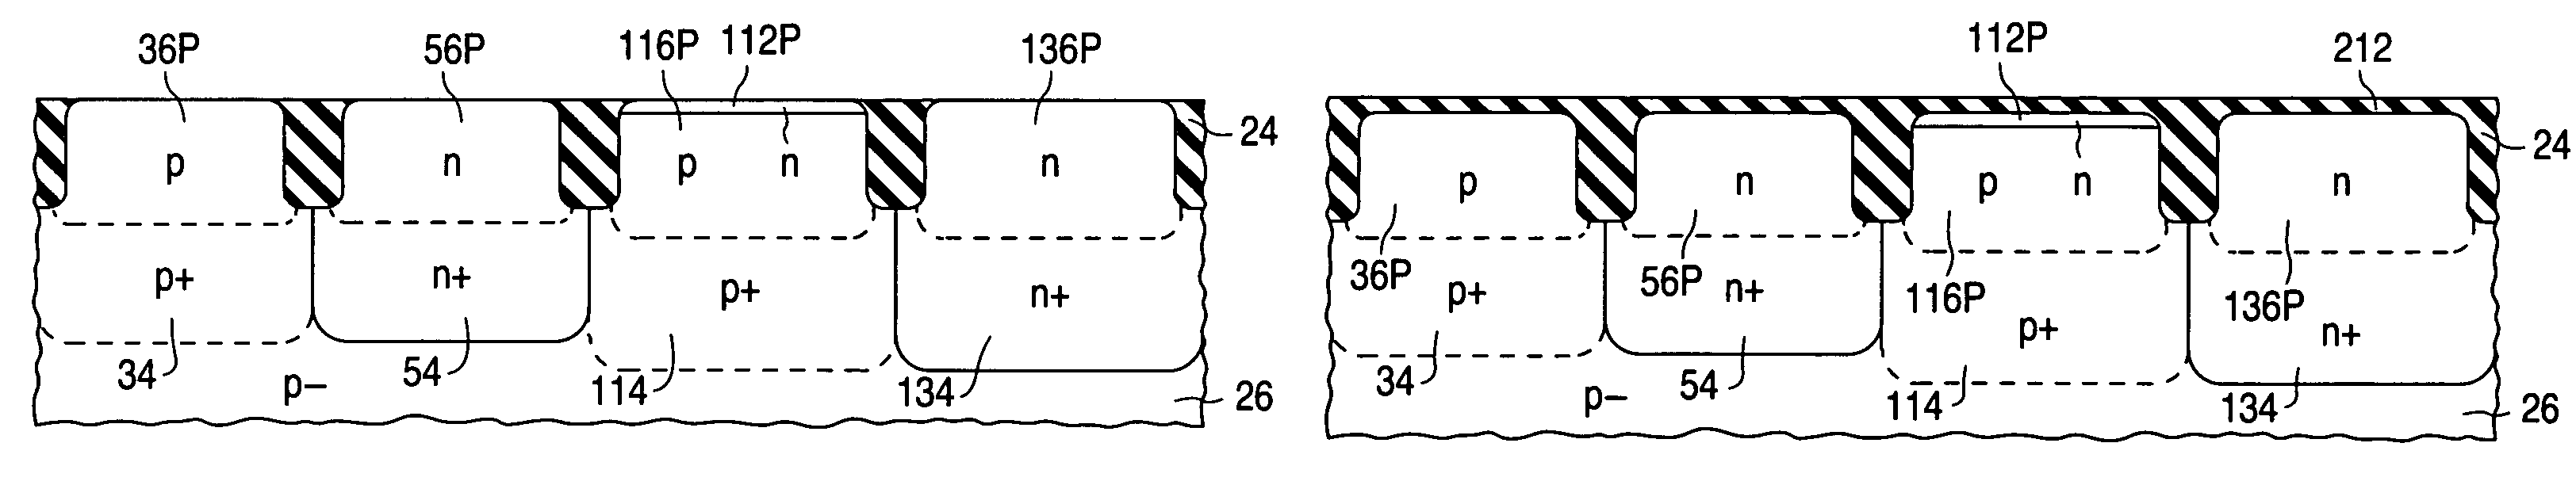 Fabrication of semiconductor structure having N-channel channel-junction field-effect transistor